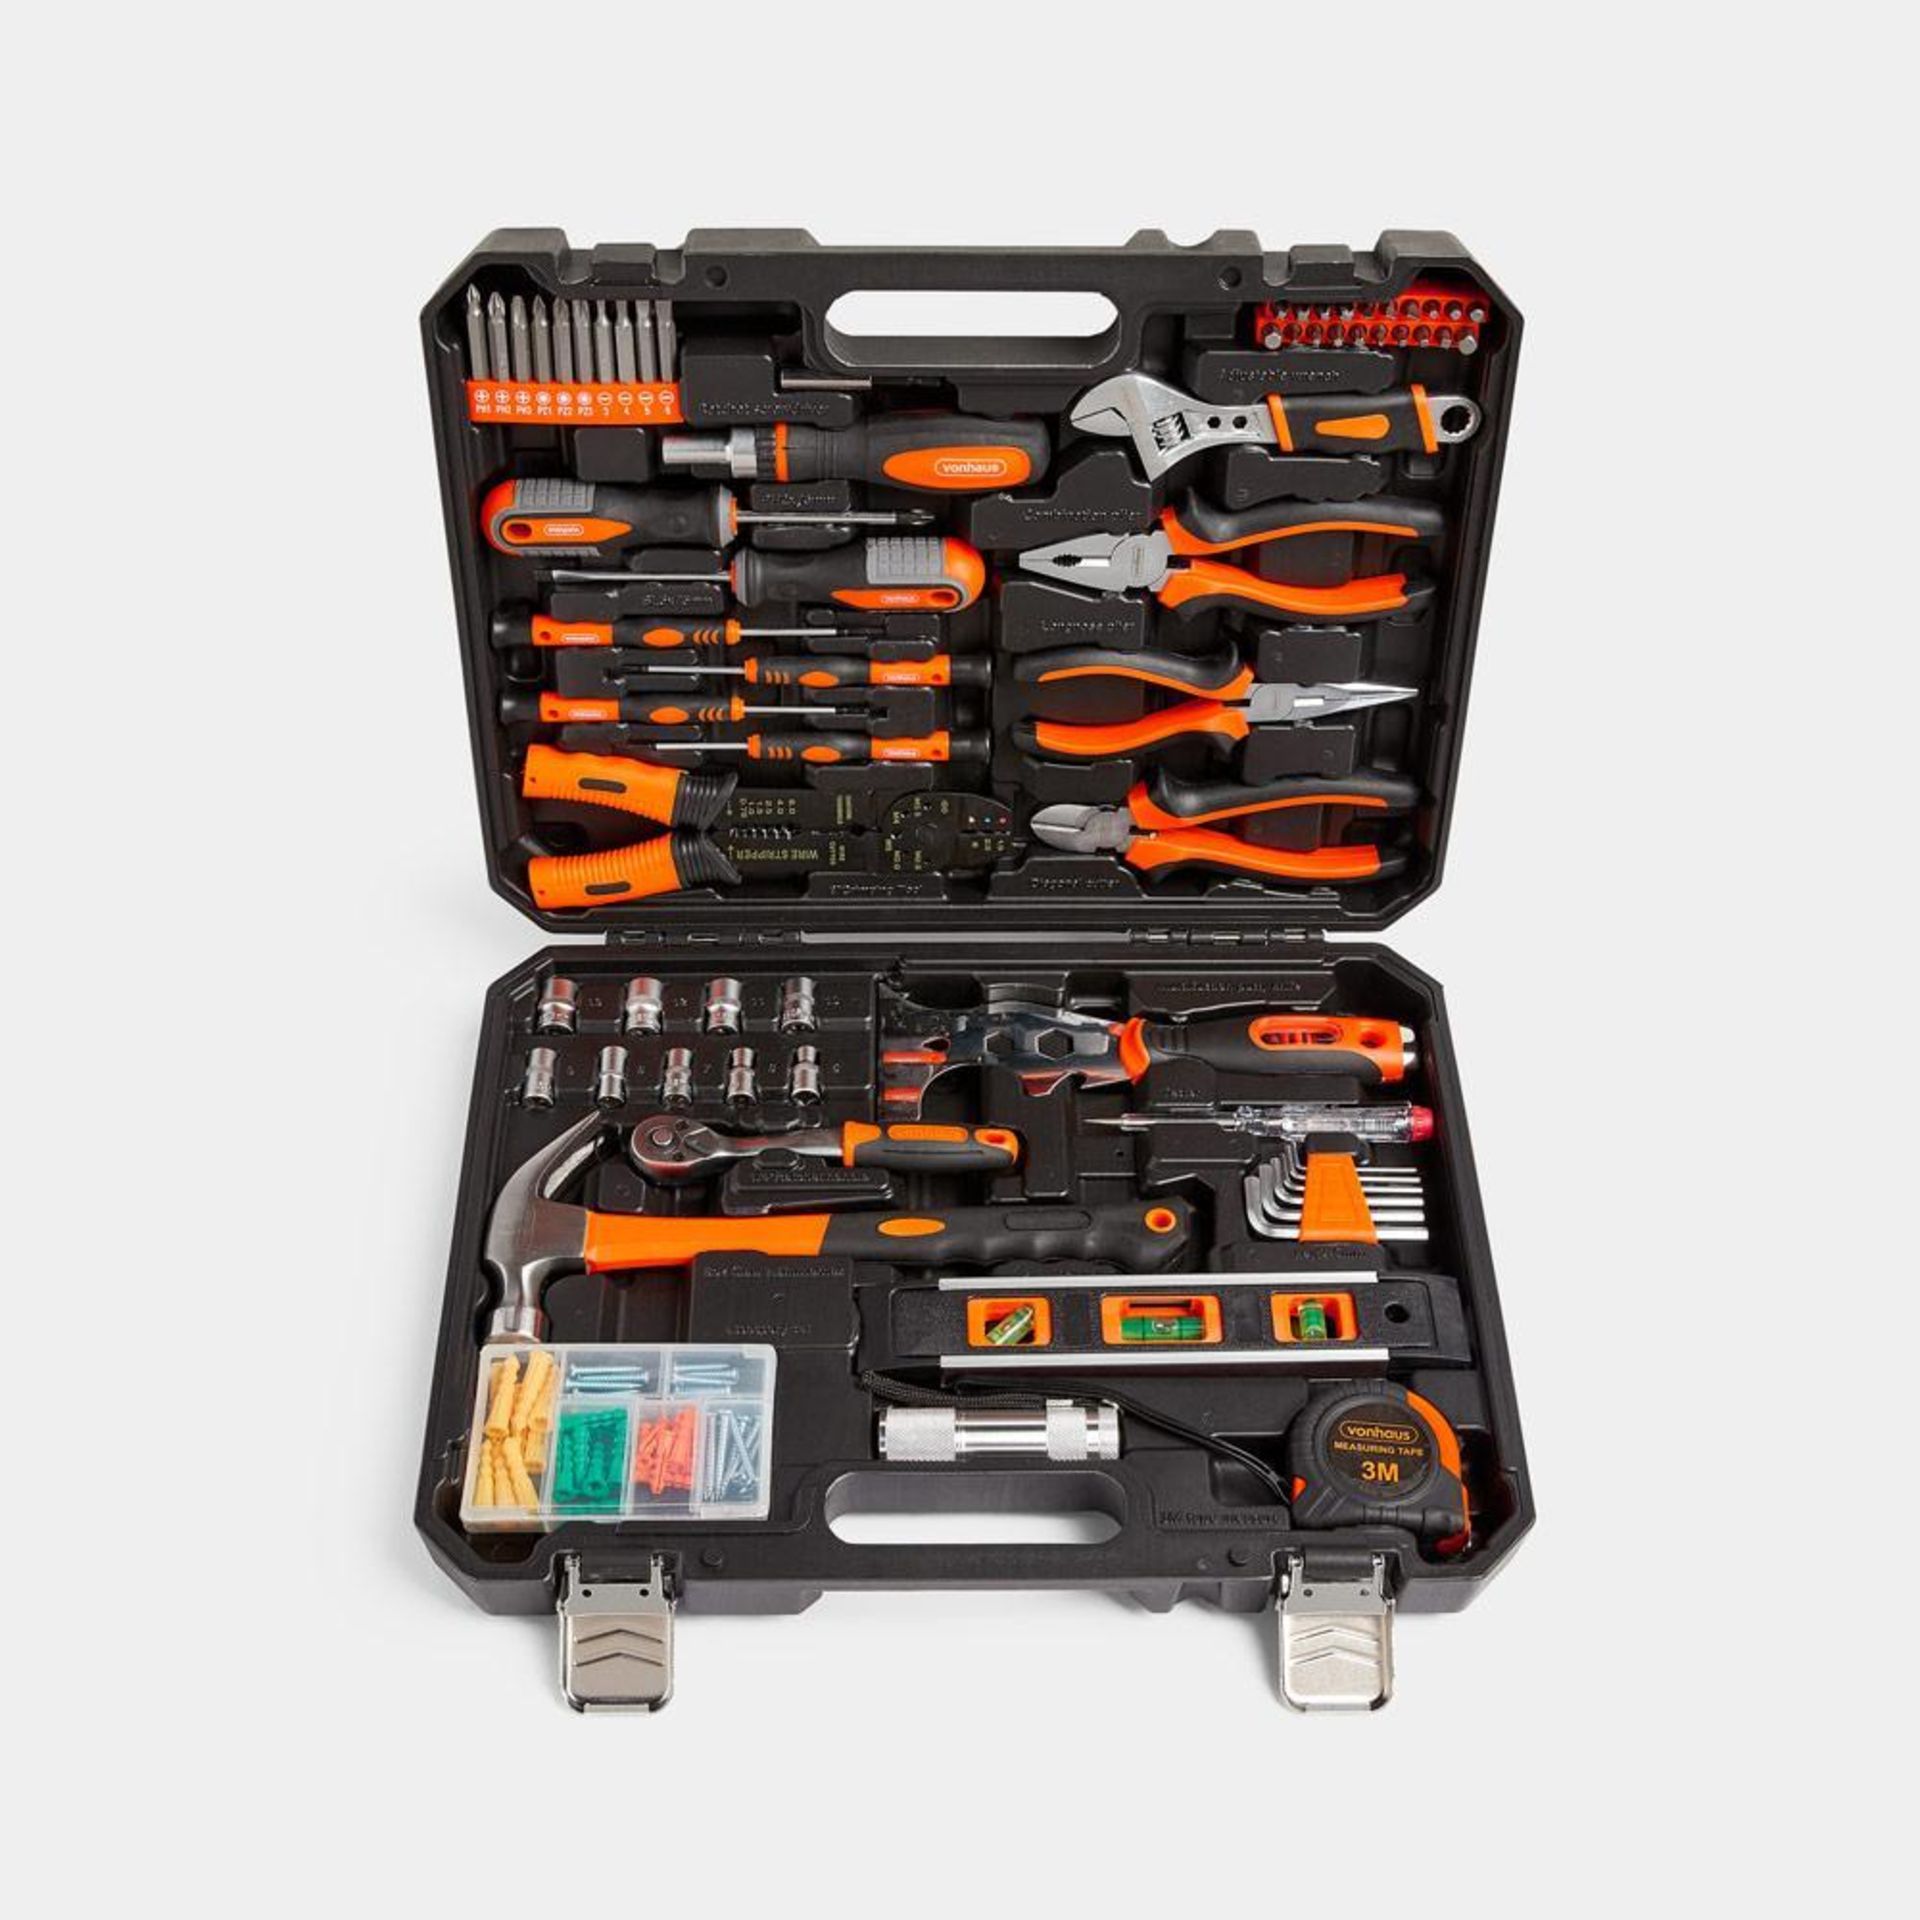 120Pc Ultimate Hand Tool Set - P2. 120Pc Ultimate Hand Tool SetÂ Shop our Ultimate Hand Tool Set